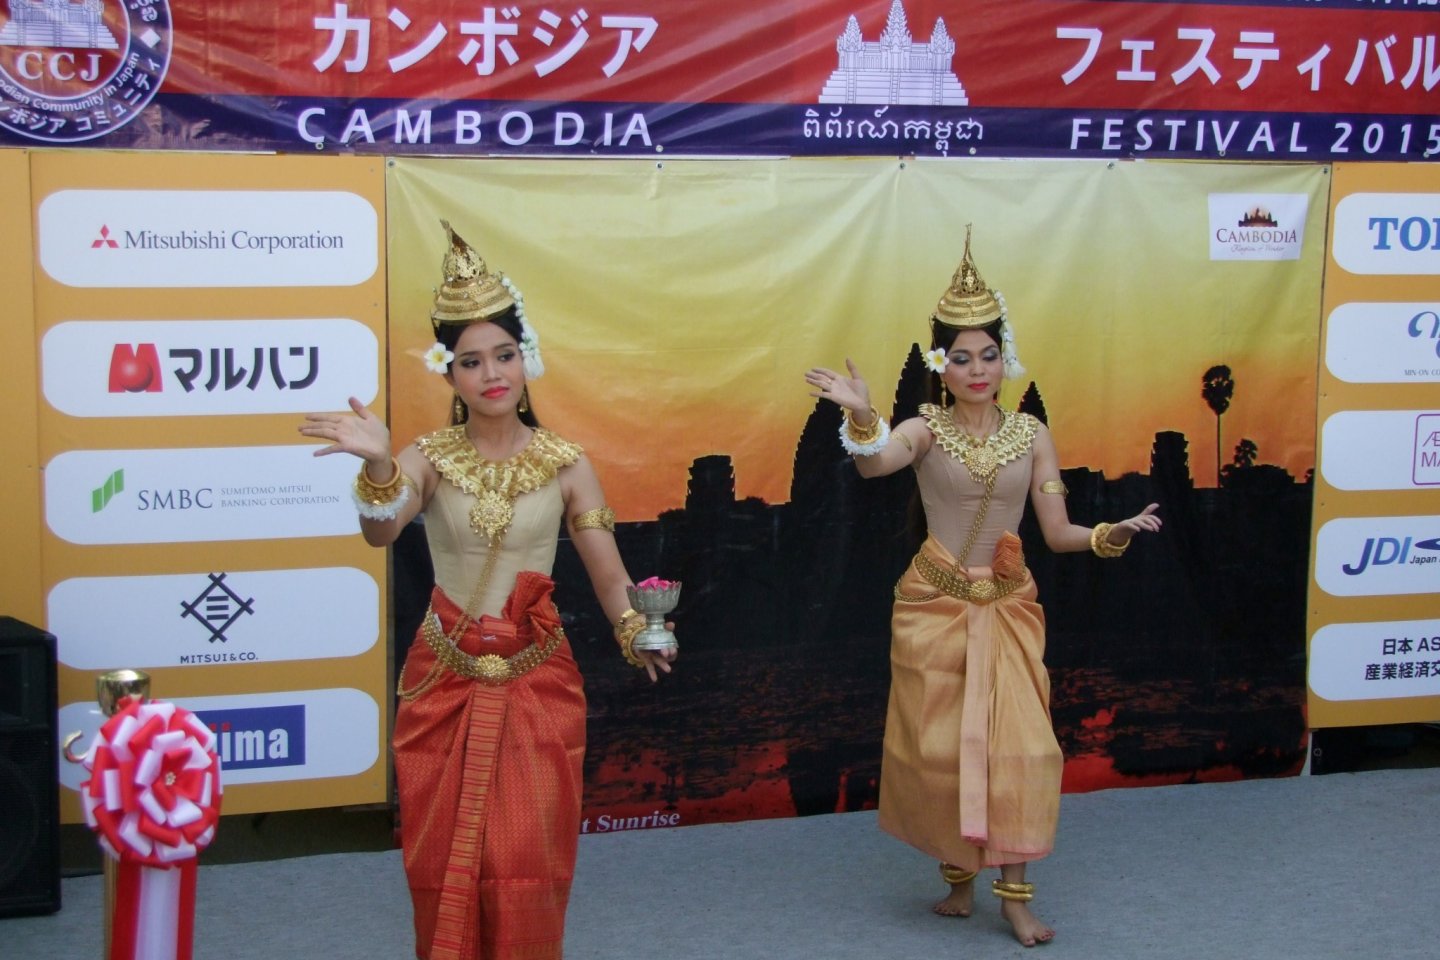 A traditional dance troupe performing at the Cambodia Festival in Yoyogi Park